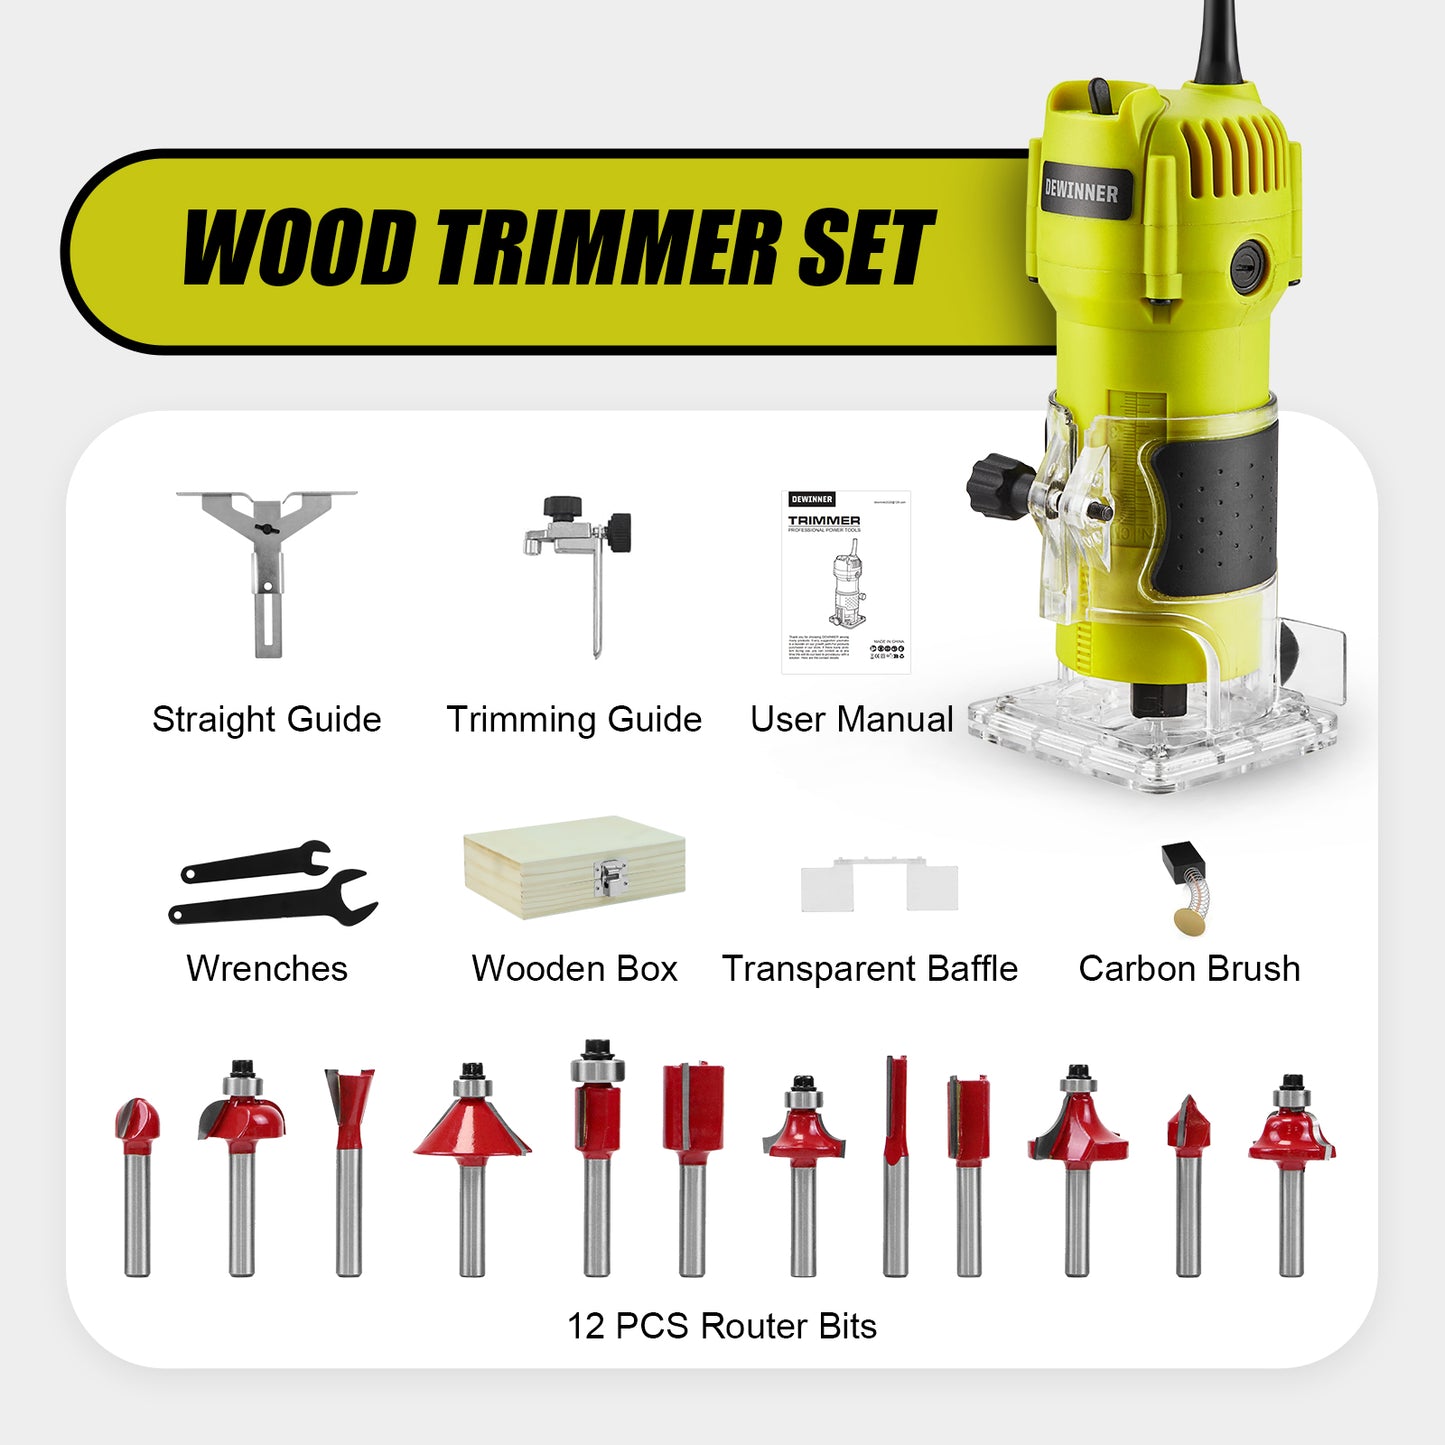 Electric Hand Palm Router, DEWINNER Trimmer Laminate Wood Working Joiners Tool, Compact Router with Trimmer Base, 3 Guide,2 Collets 1/4"(6.35mm) and 3/8"